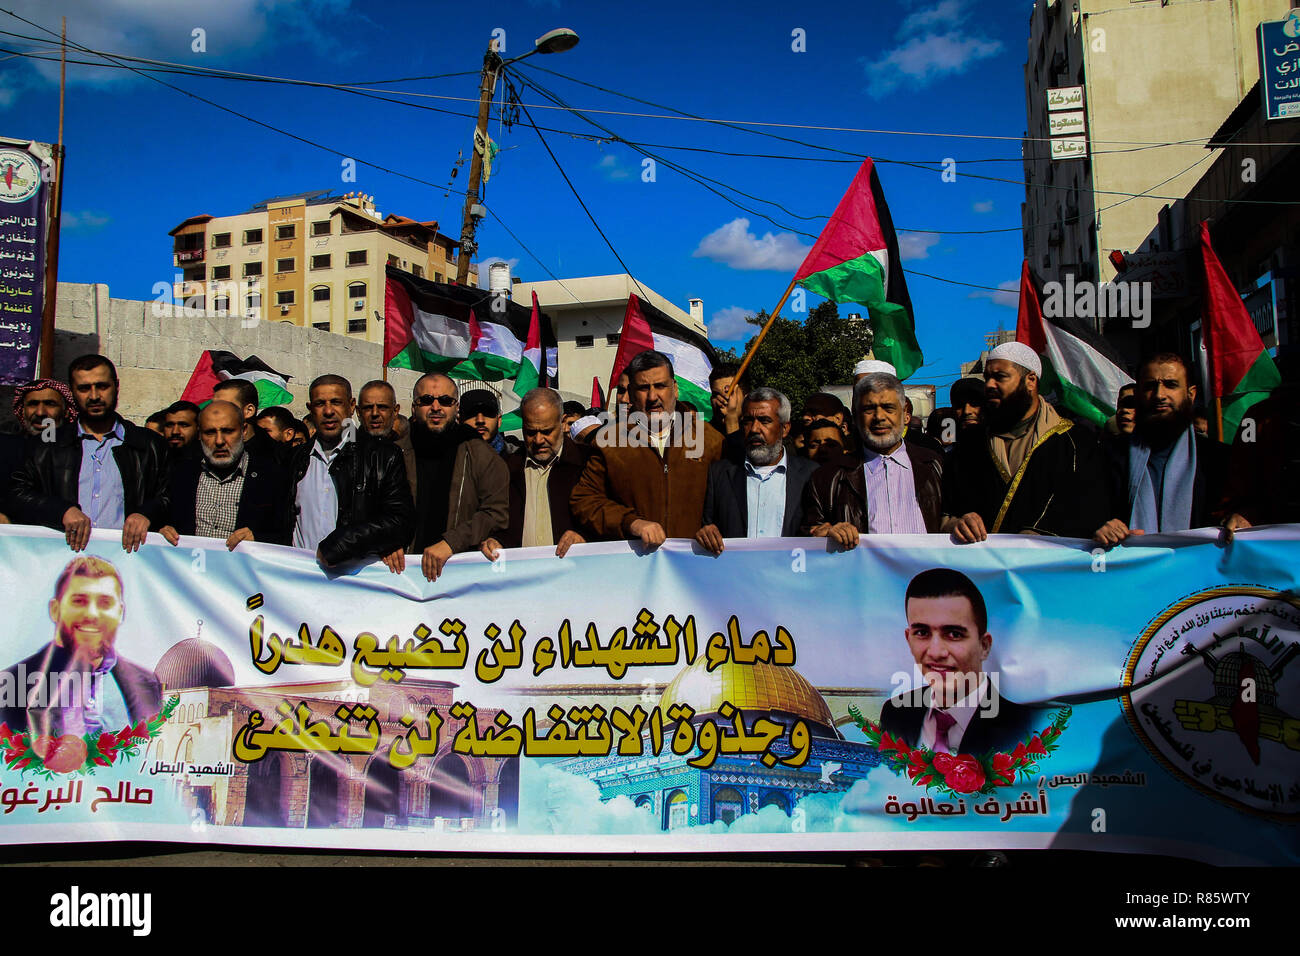 December 13, 2018 - Different Palestinian factions organise a mass demonstration in Gaza for two Palestinian young men, Ashraf Walid Suleiman Na'alwa and Saleh Omar Barghouti, killed during Israeli raids in Nablus and near Ramallah in the early morning of Thursday 13th December 2018. The two Palestinian killed were suspected by the Israeli authorities to be part of the cell that injured seven Israeli civilians near the Ofra Israeli settlement in the northern West Bank early in the week Credit: Ahmad Hasaballah/IMAGESLIVE/ZUMA Wire/Alamy Live News Stock Photo